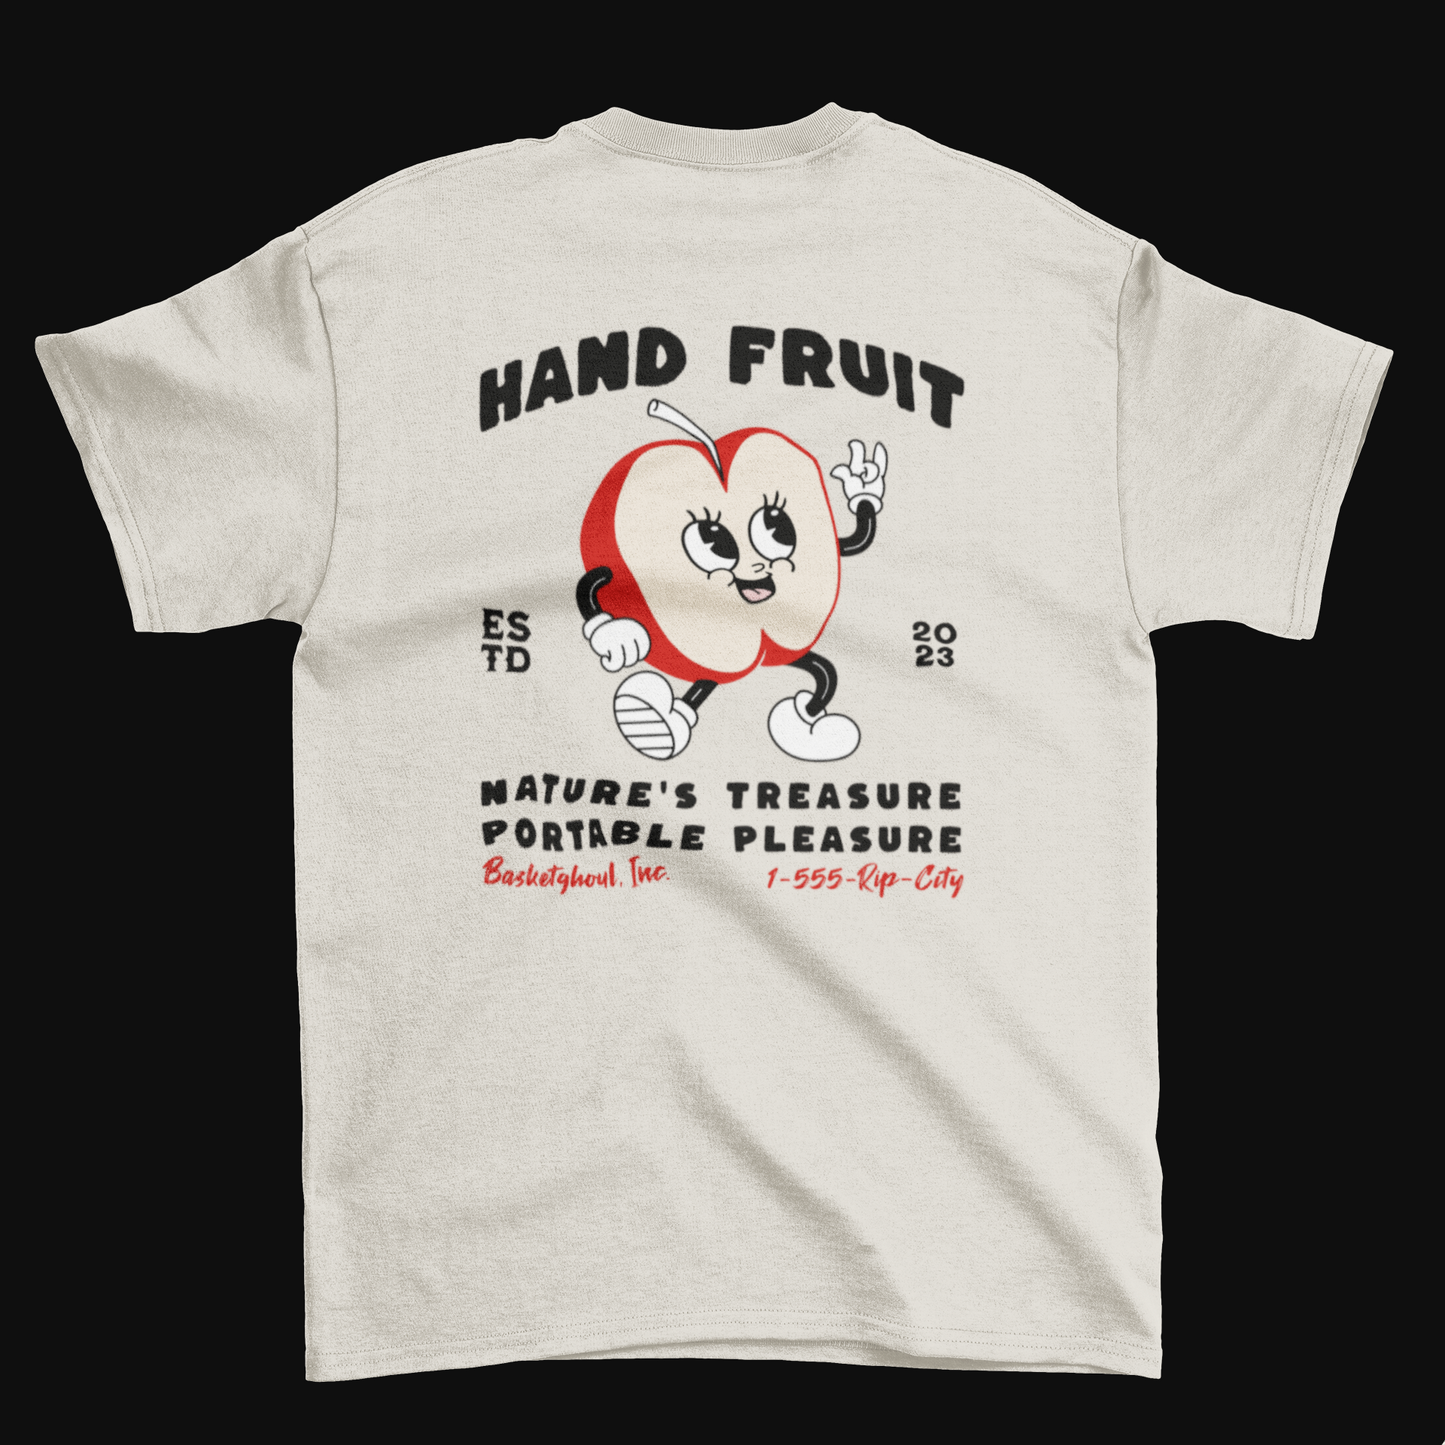 Hand Fruit T-Shirt PRE-ORDER (SHIPS IN 1-2 WEEKS)